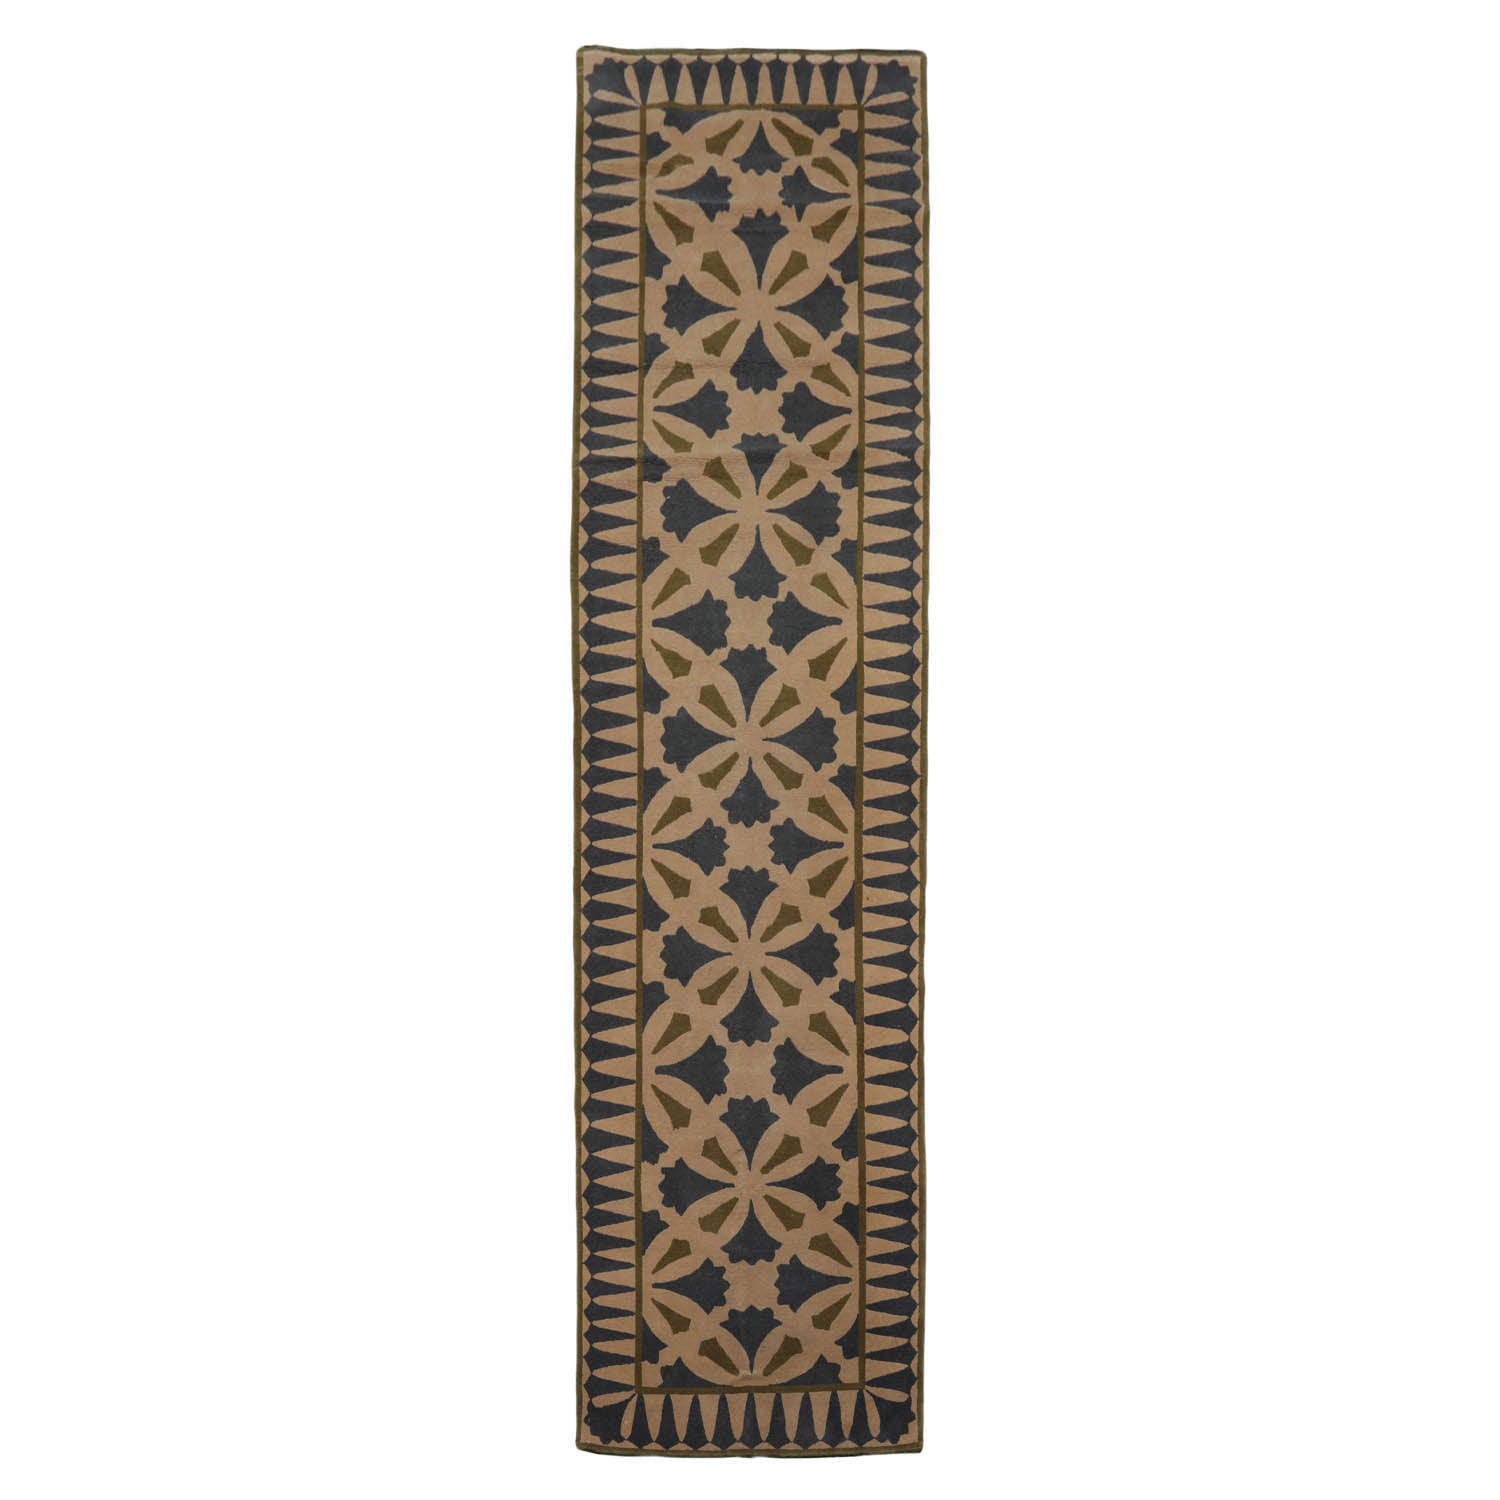 Isabelline Runner Hand Knotted Tibetan 100% Wool Lapchi Heliodoro Arts & Crafts Oriental Area Rug Beige, Green Color